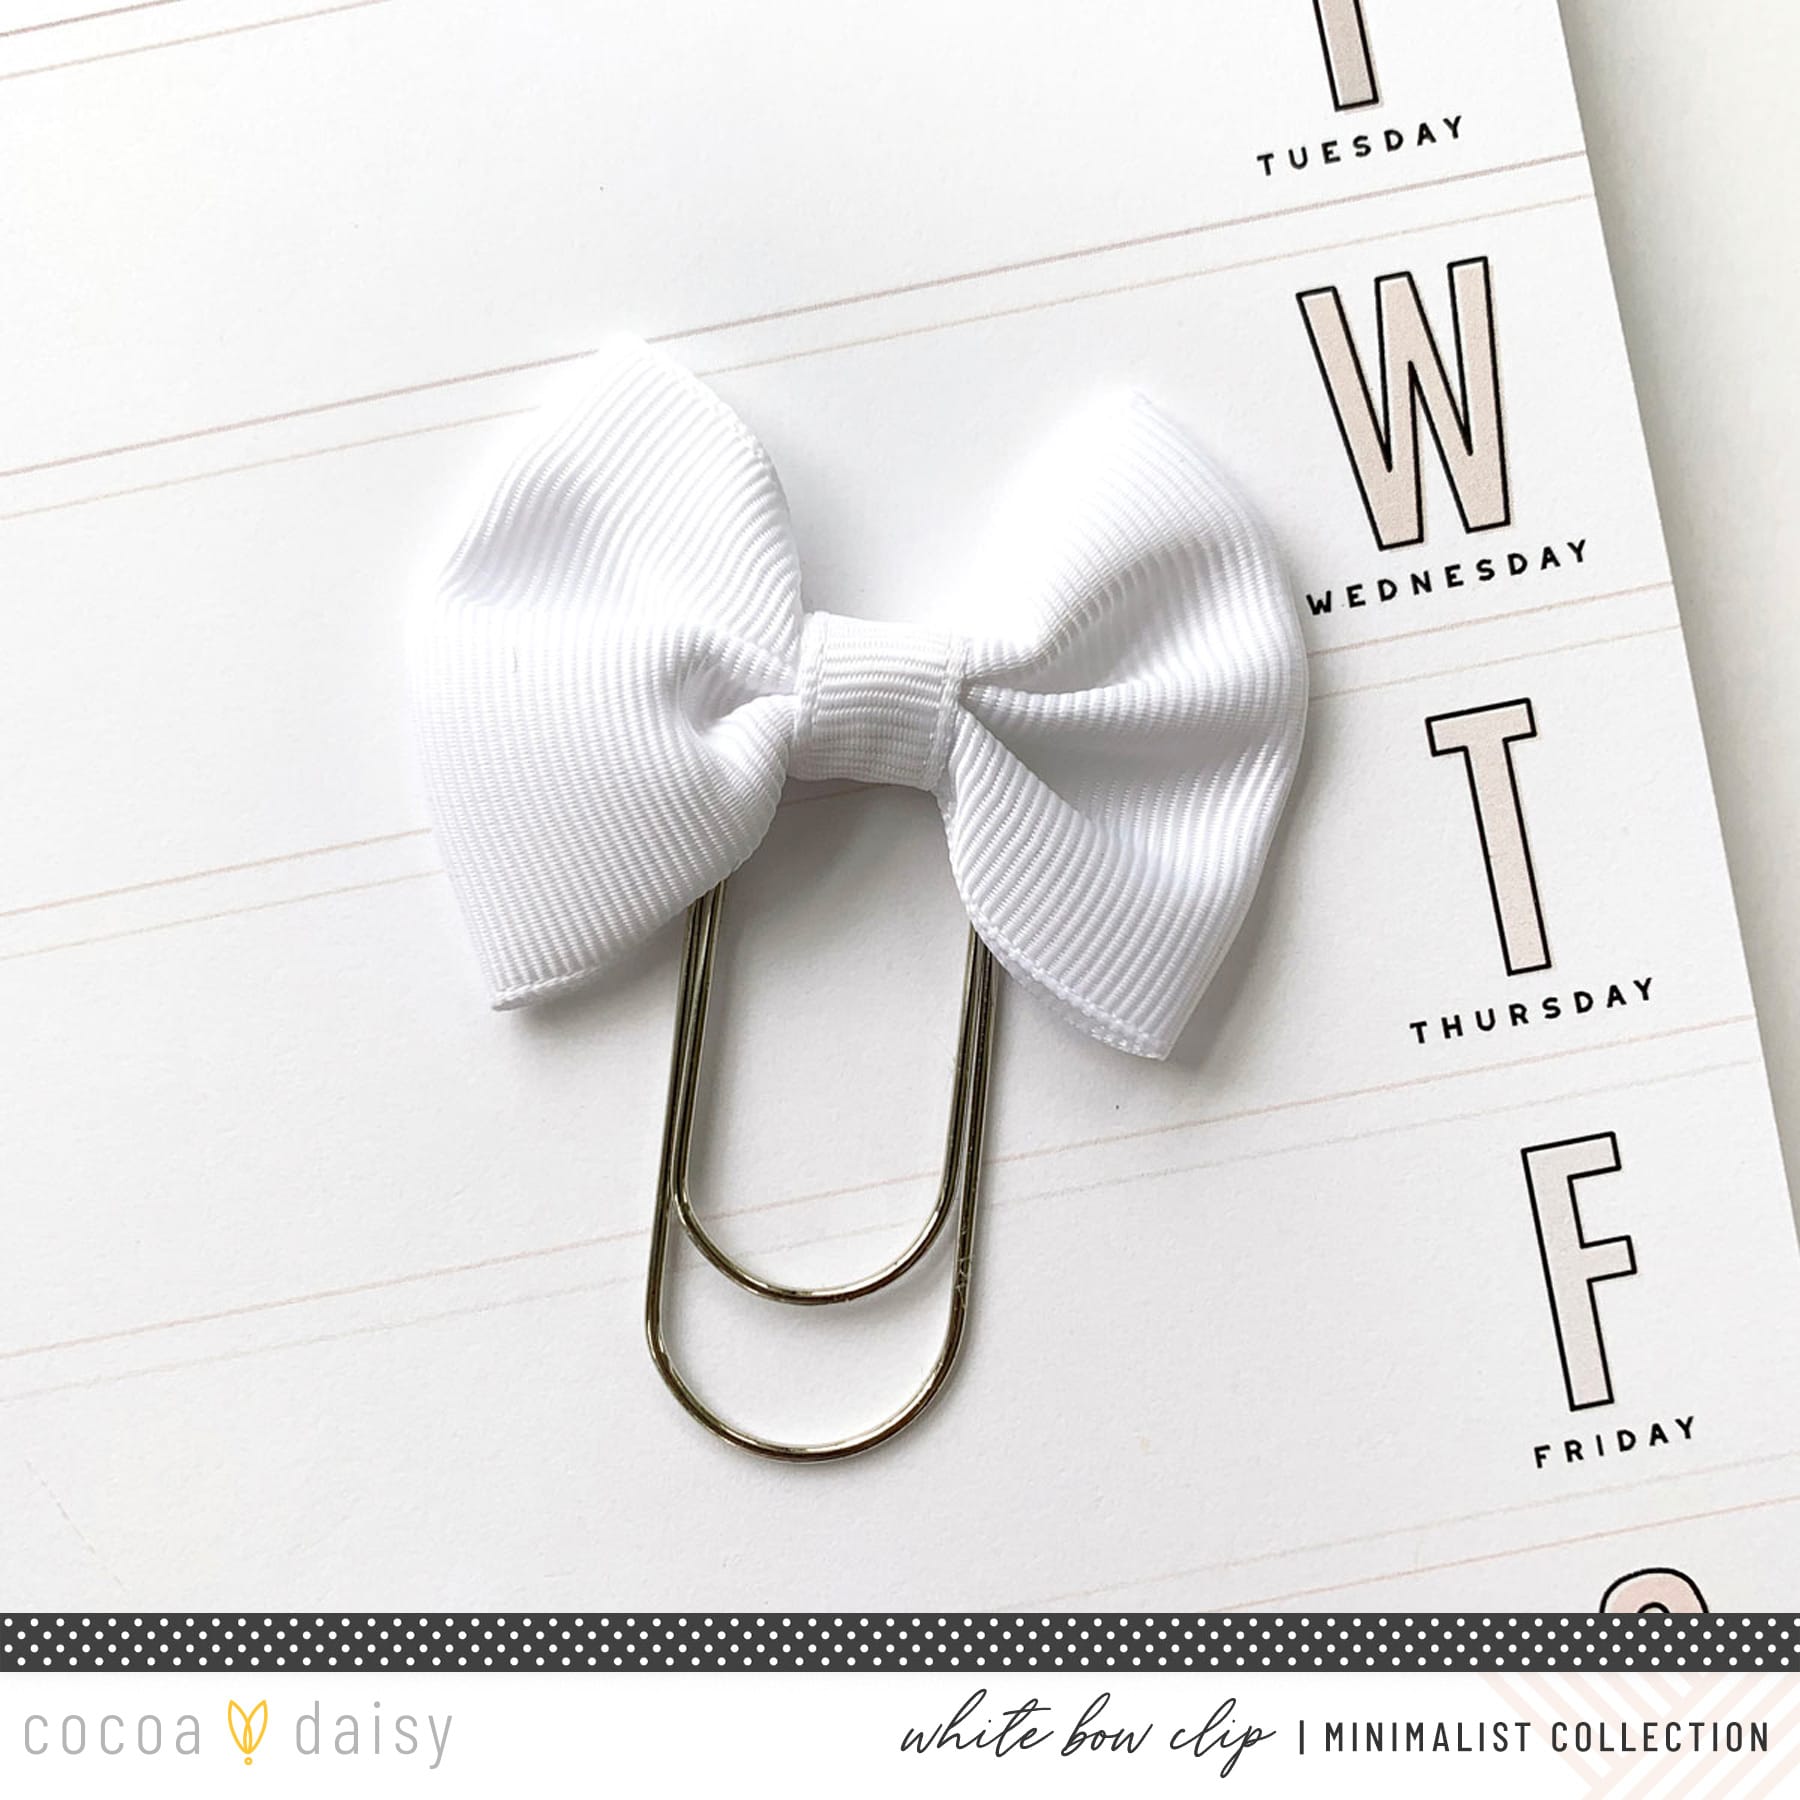 The Minimalist Collection White Bow Clip